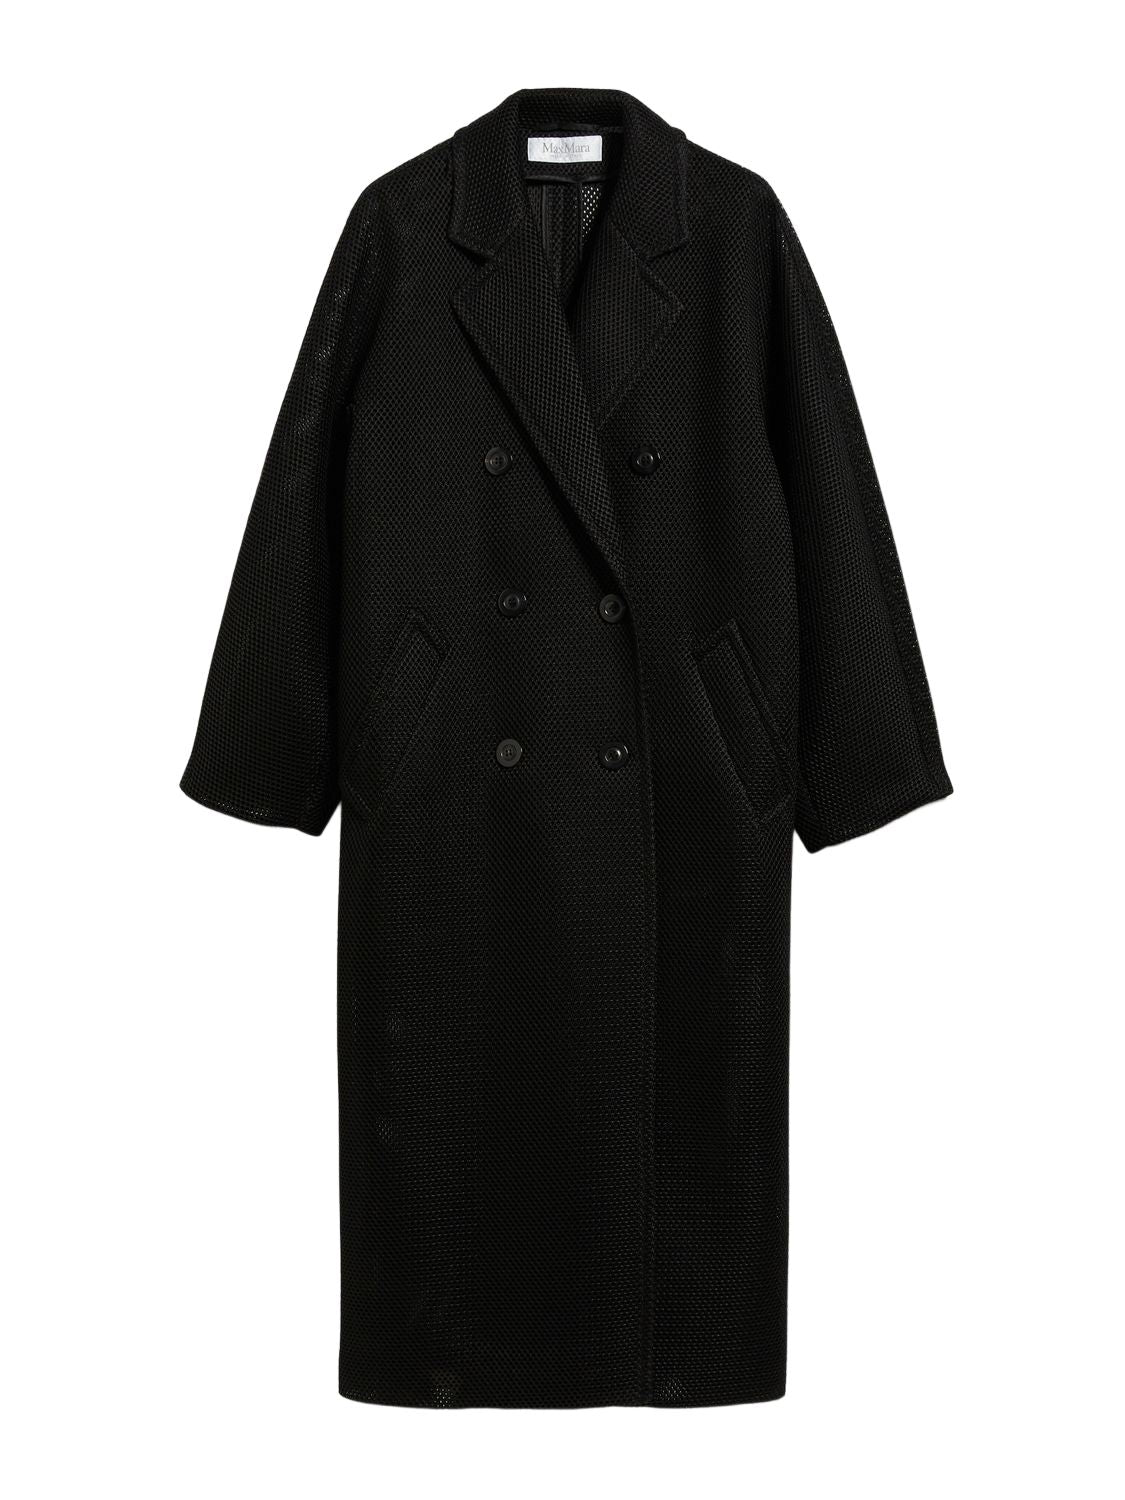 MAX MARA Classic Black Jacket for Women - Must-Have for FW23!